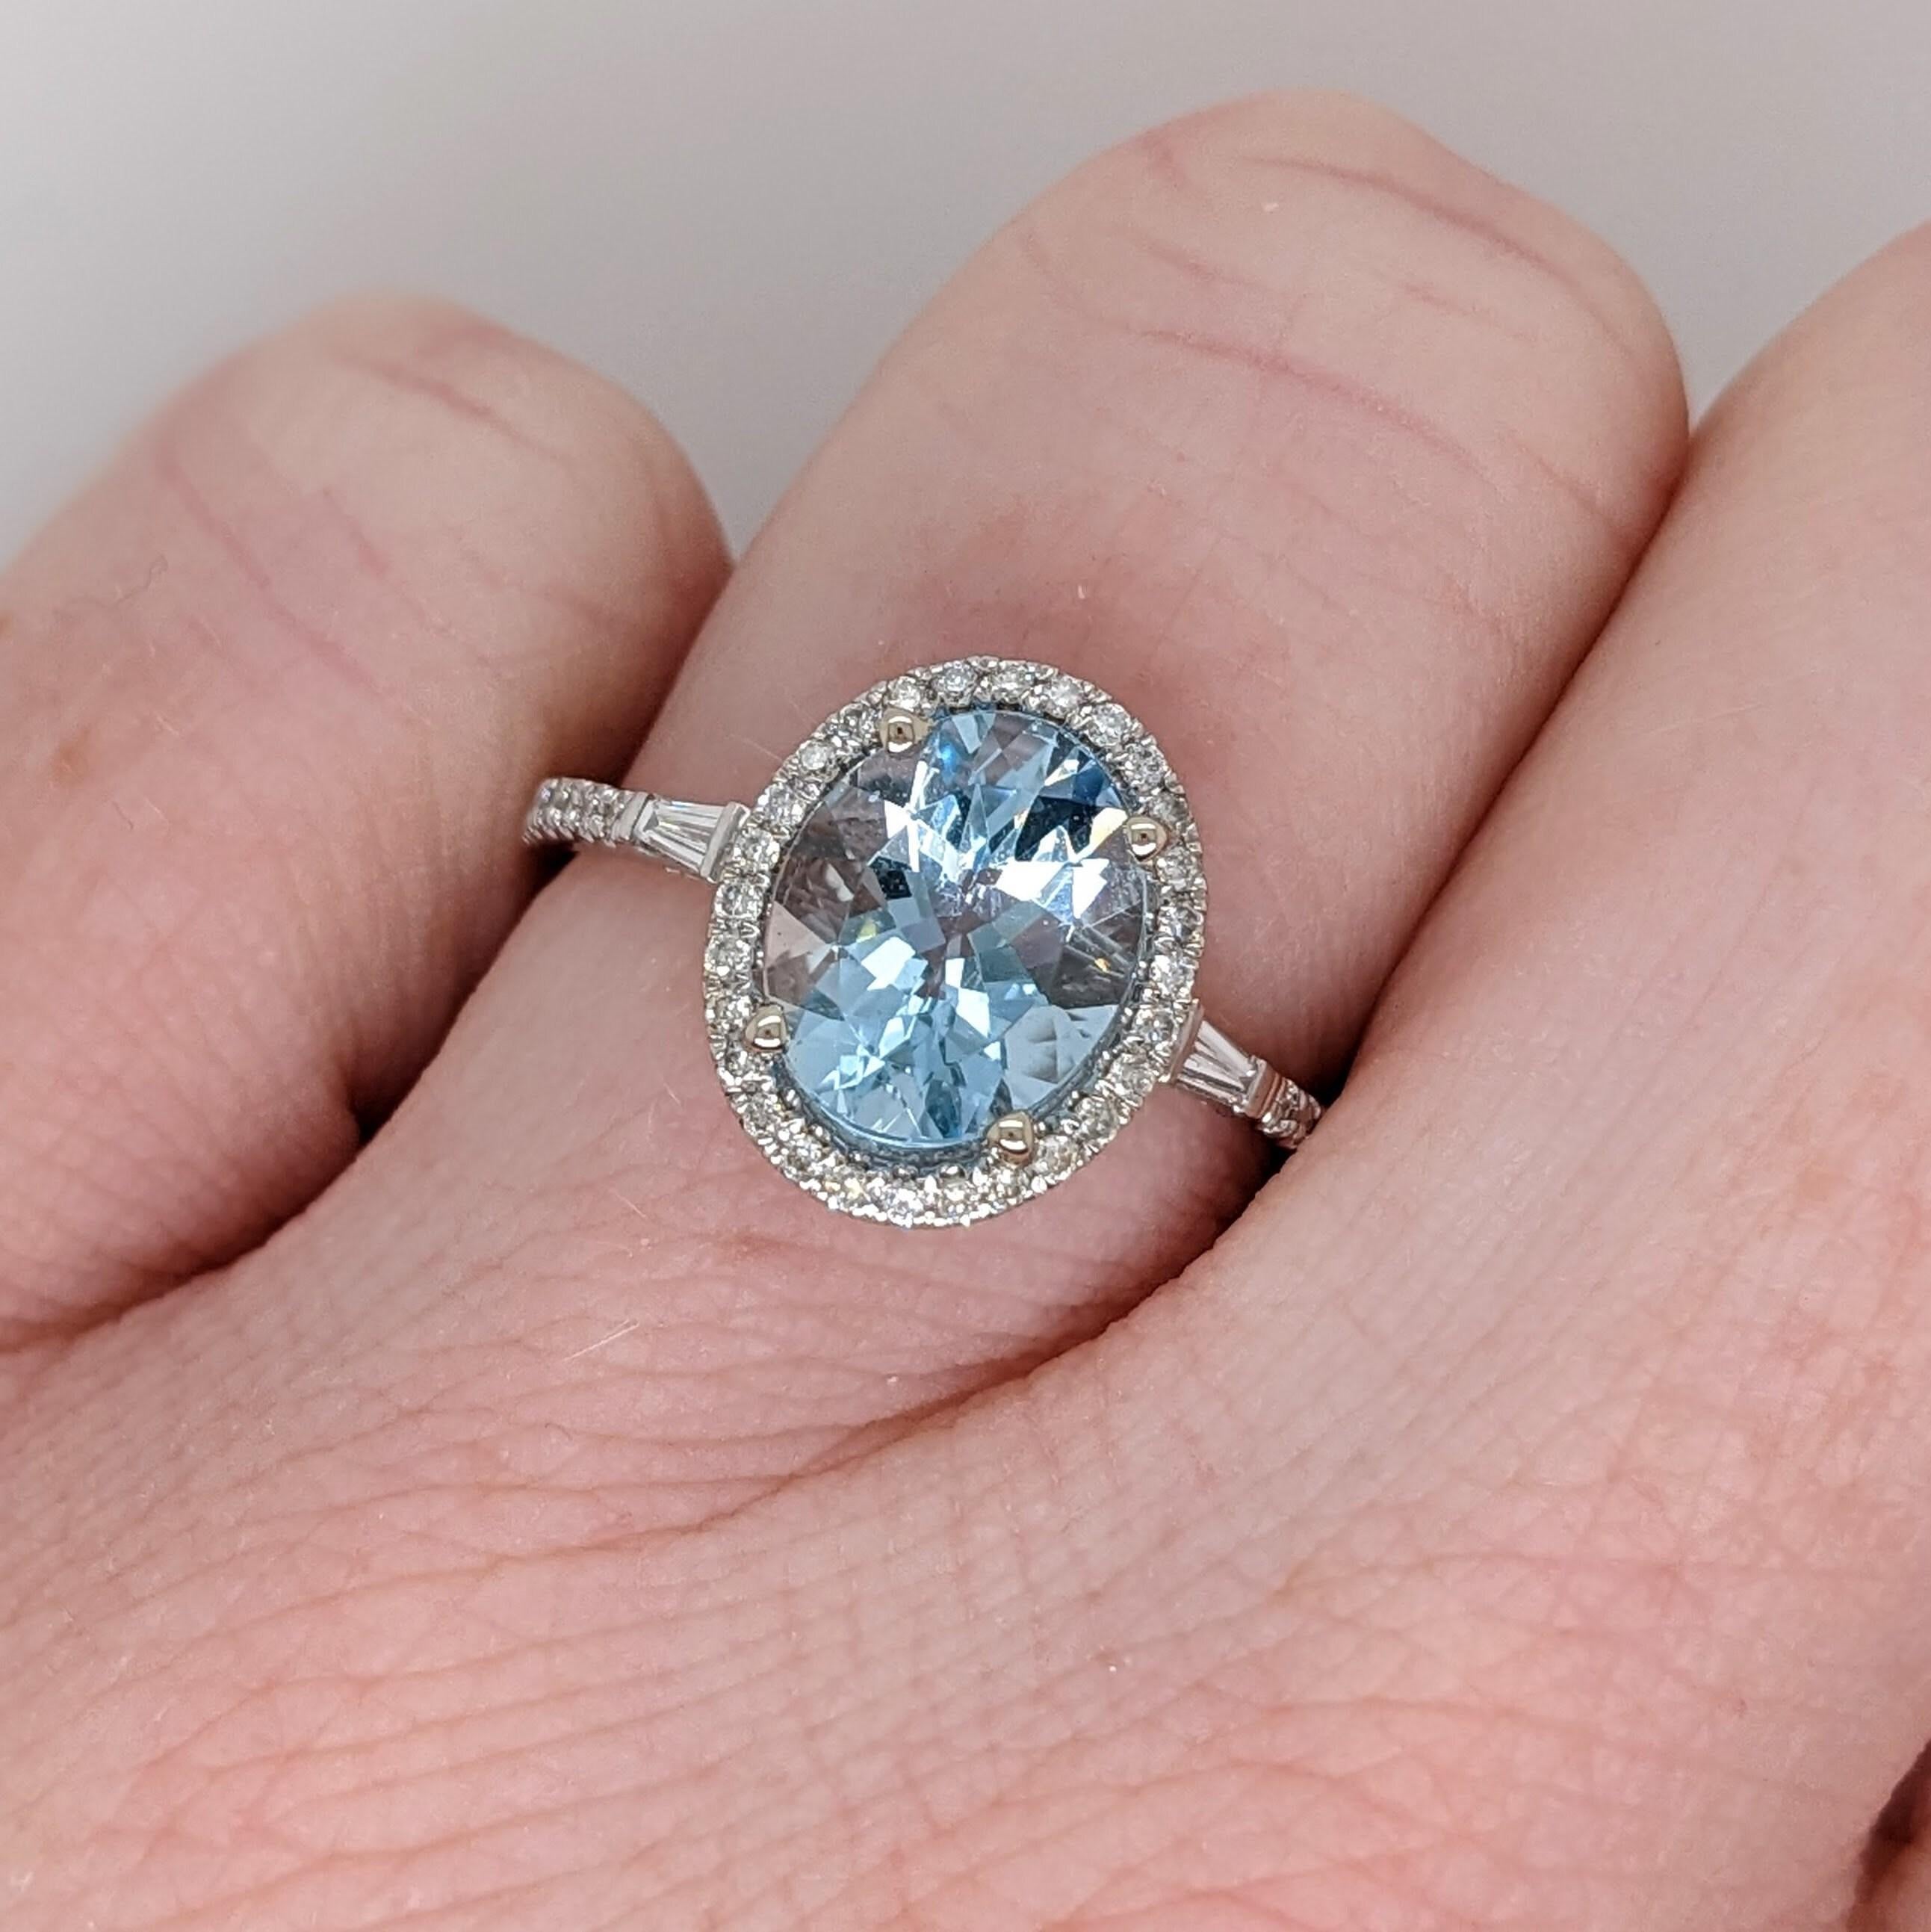 Beautiful Aquamarine Ring in Solid 14K White Gold with a Halo of Natural Diamond 1